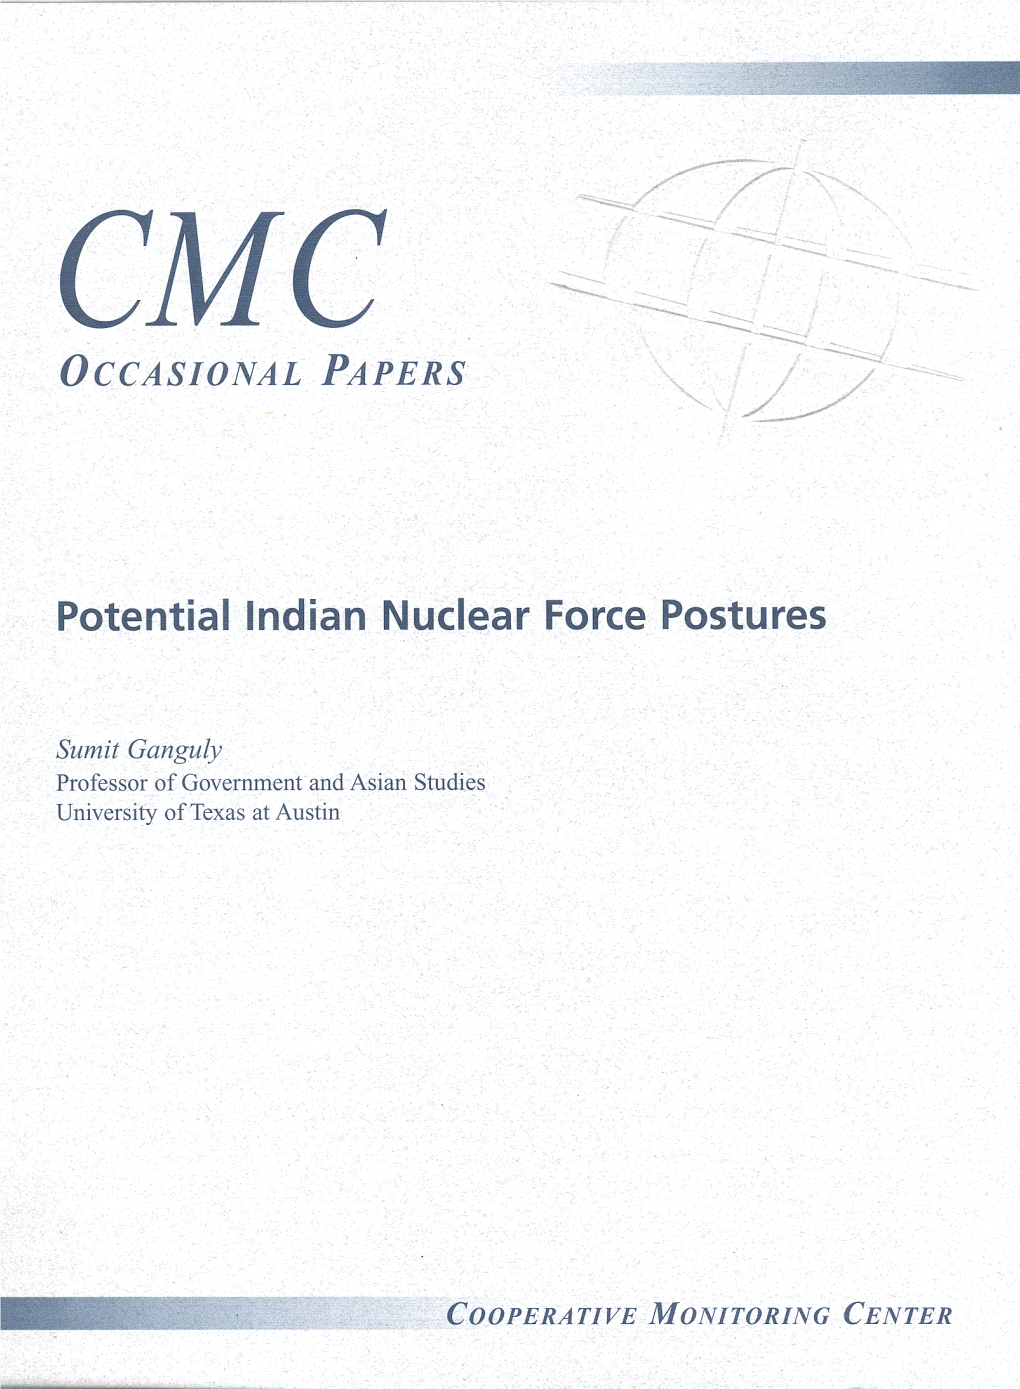 Potential Indian Nuclear Forces Postures